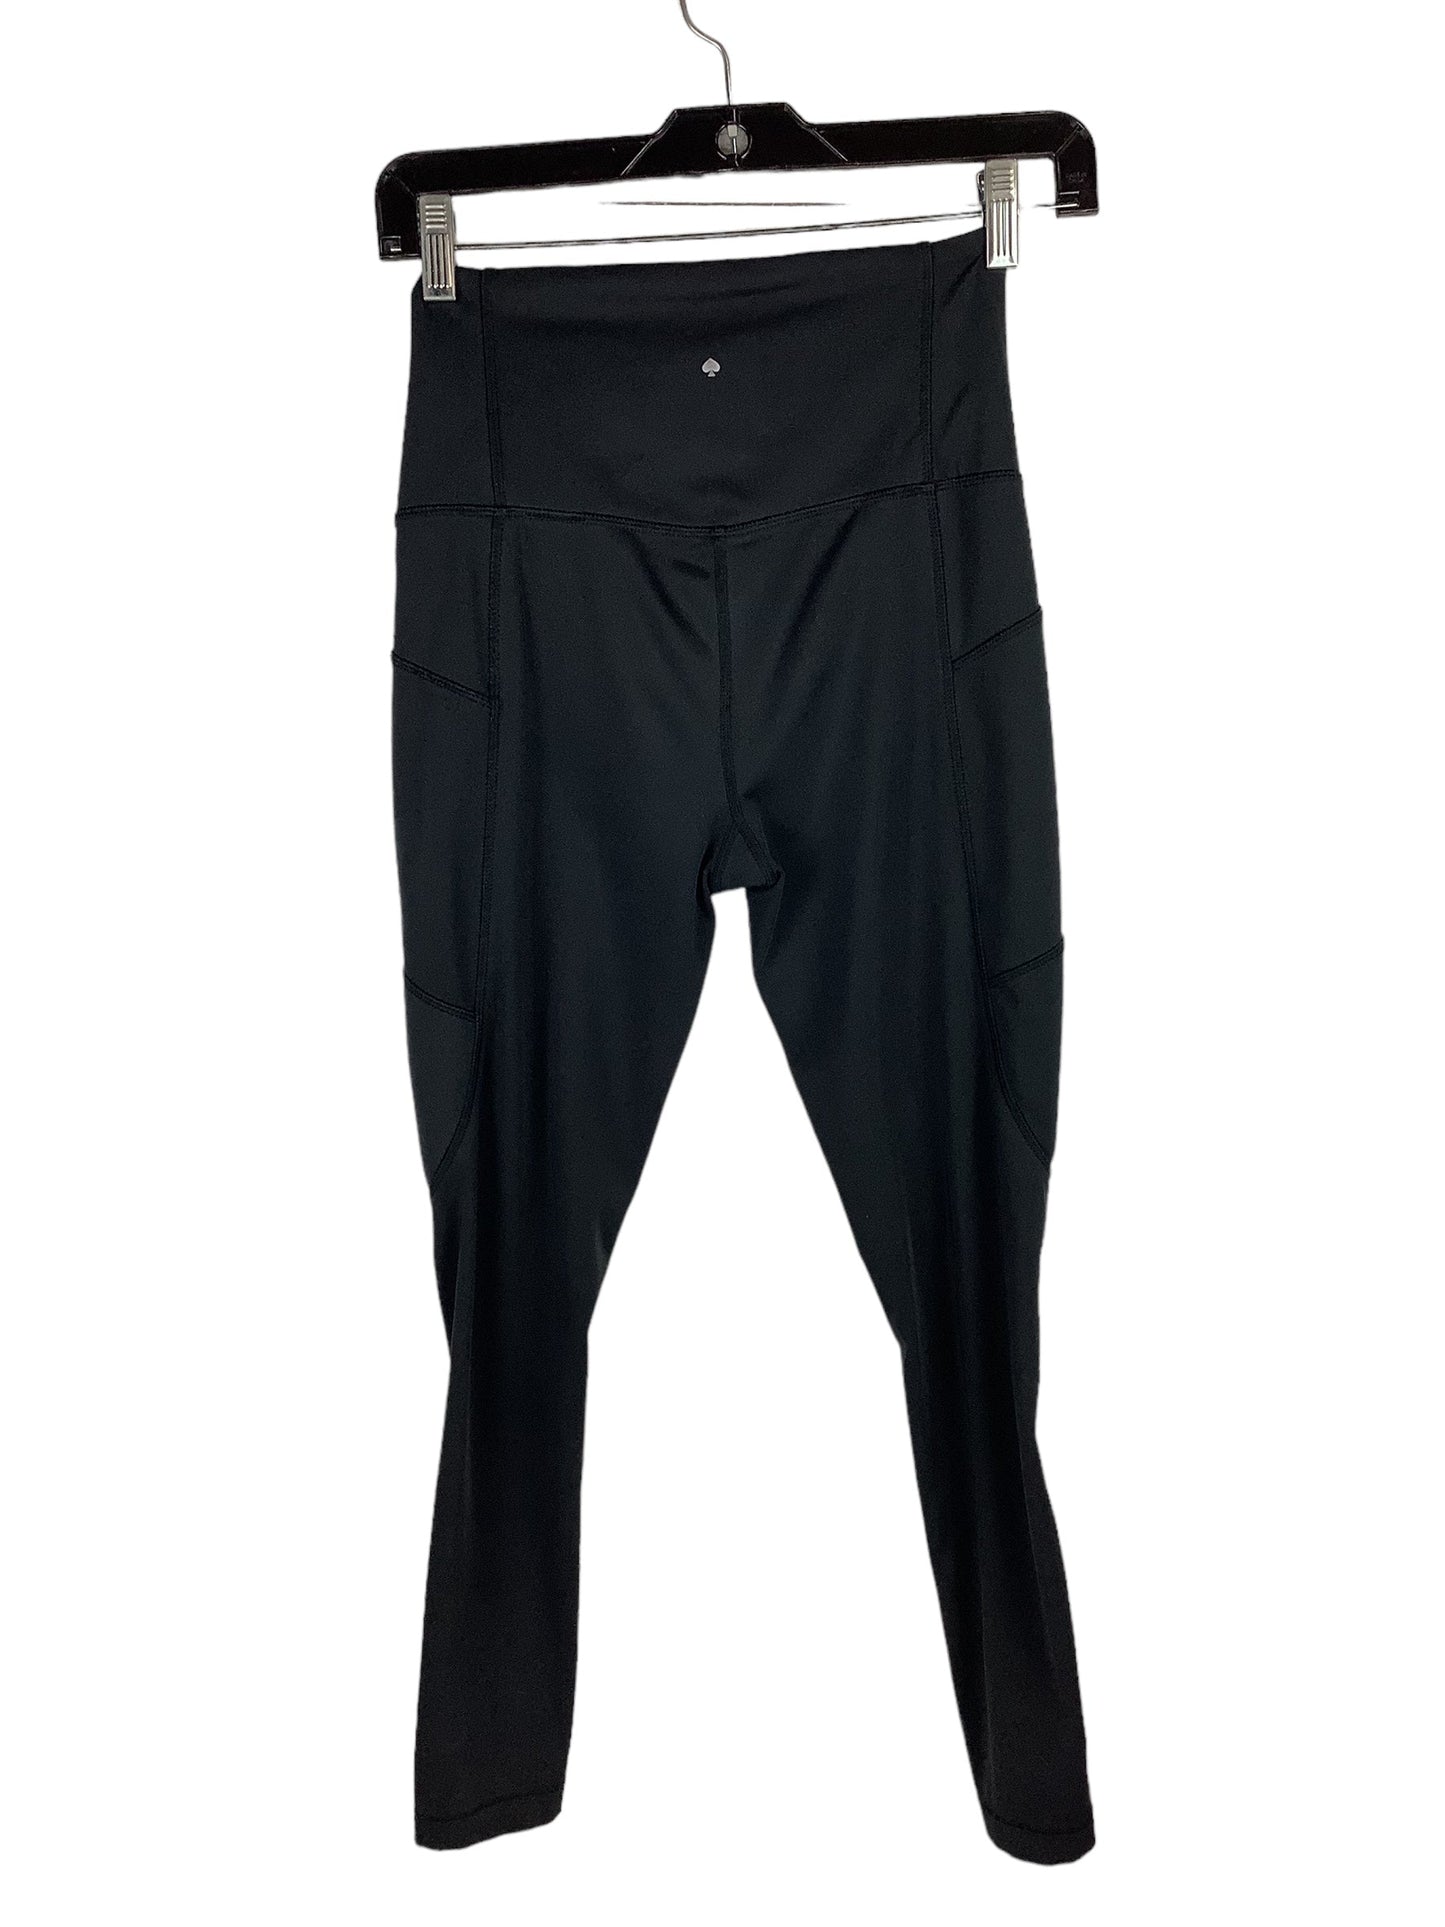 Athletic Pants Designer By Kate Spade  Size: Xs